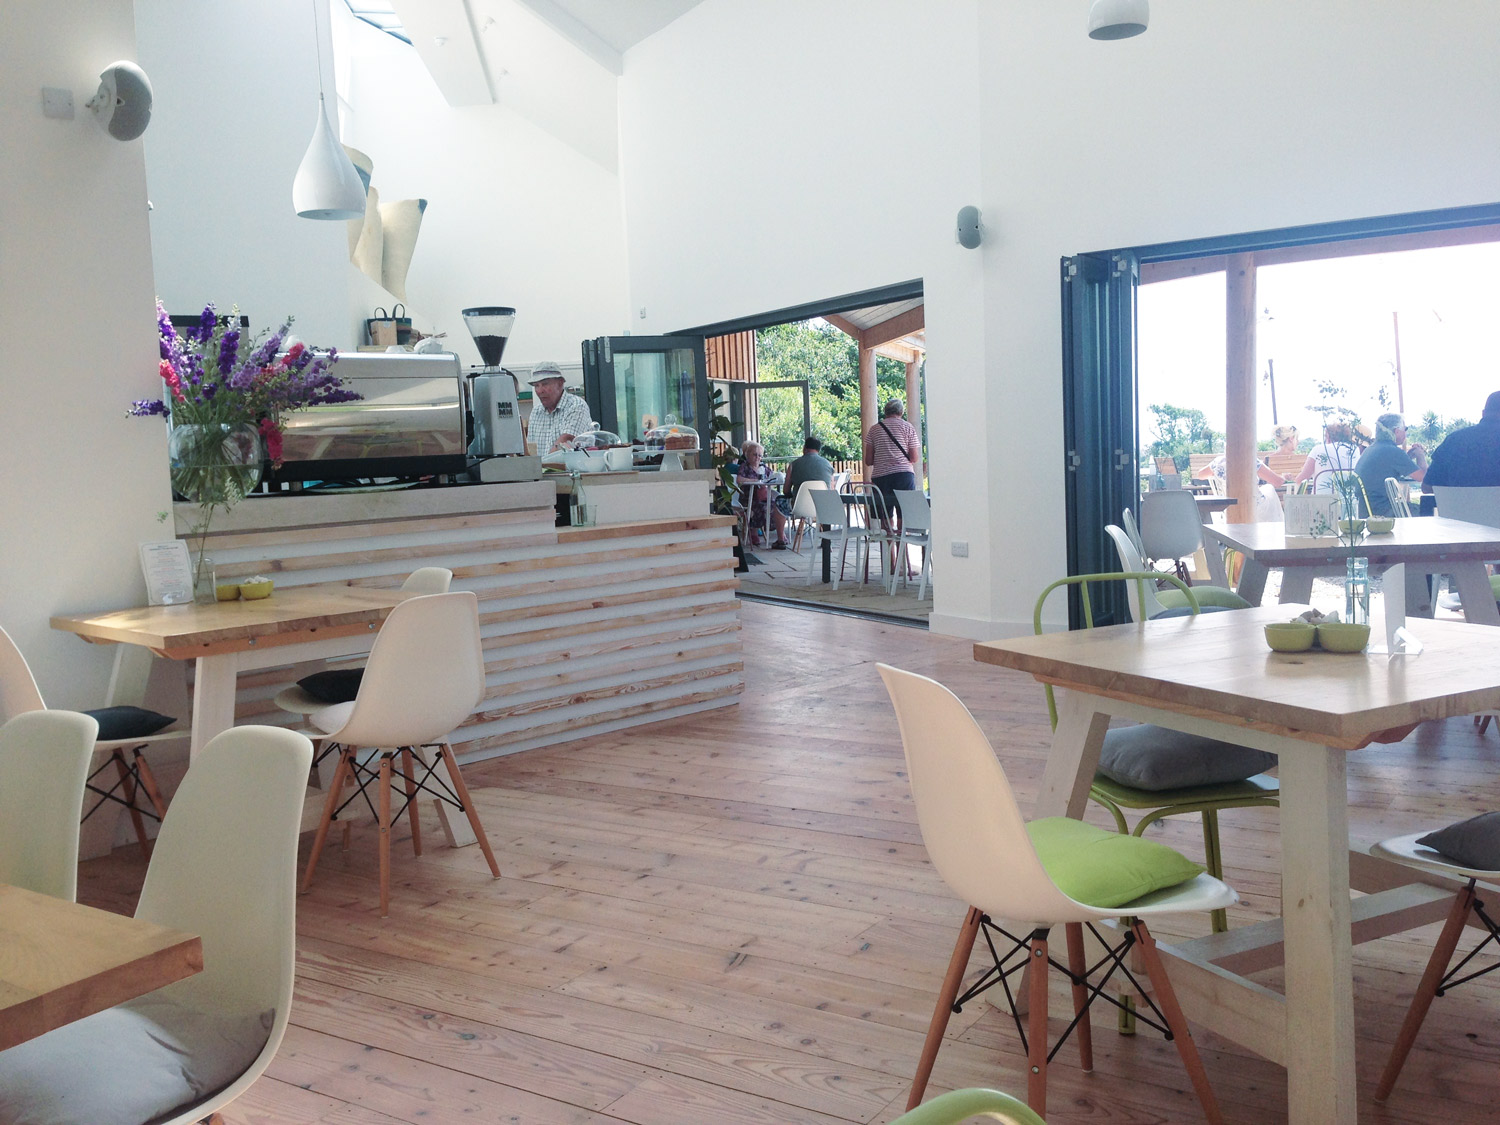 Commercial architect designed building in Cornwall Cafe